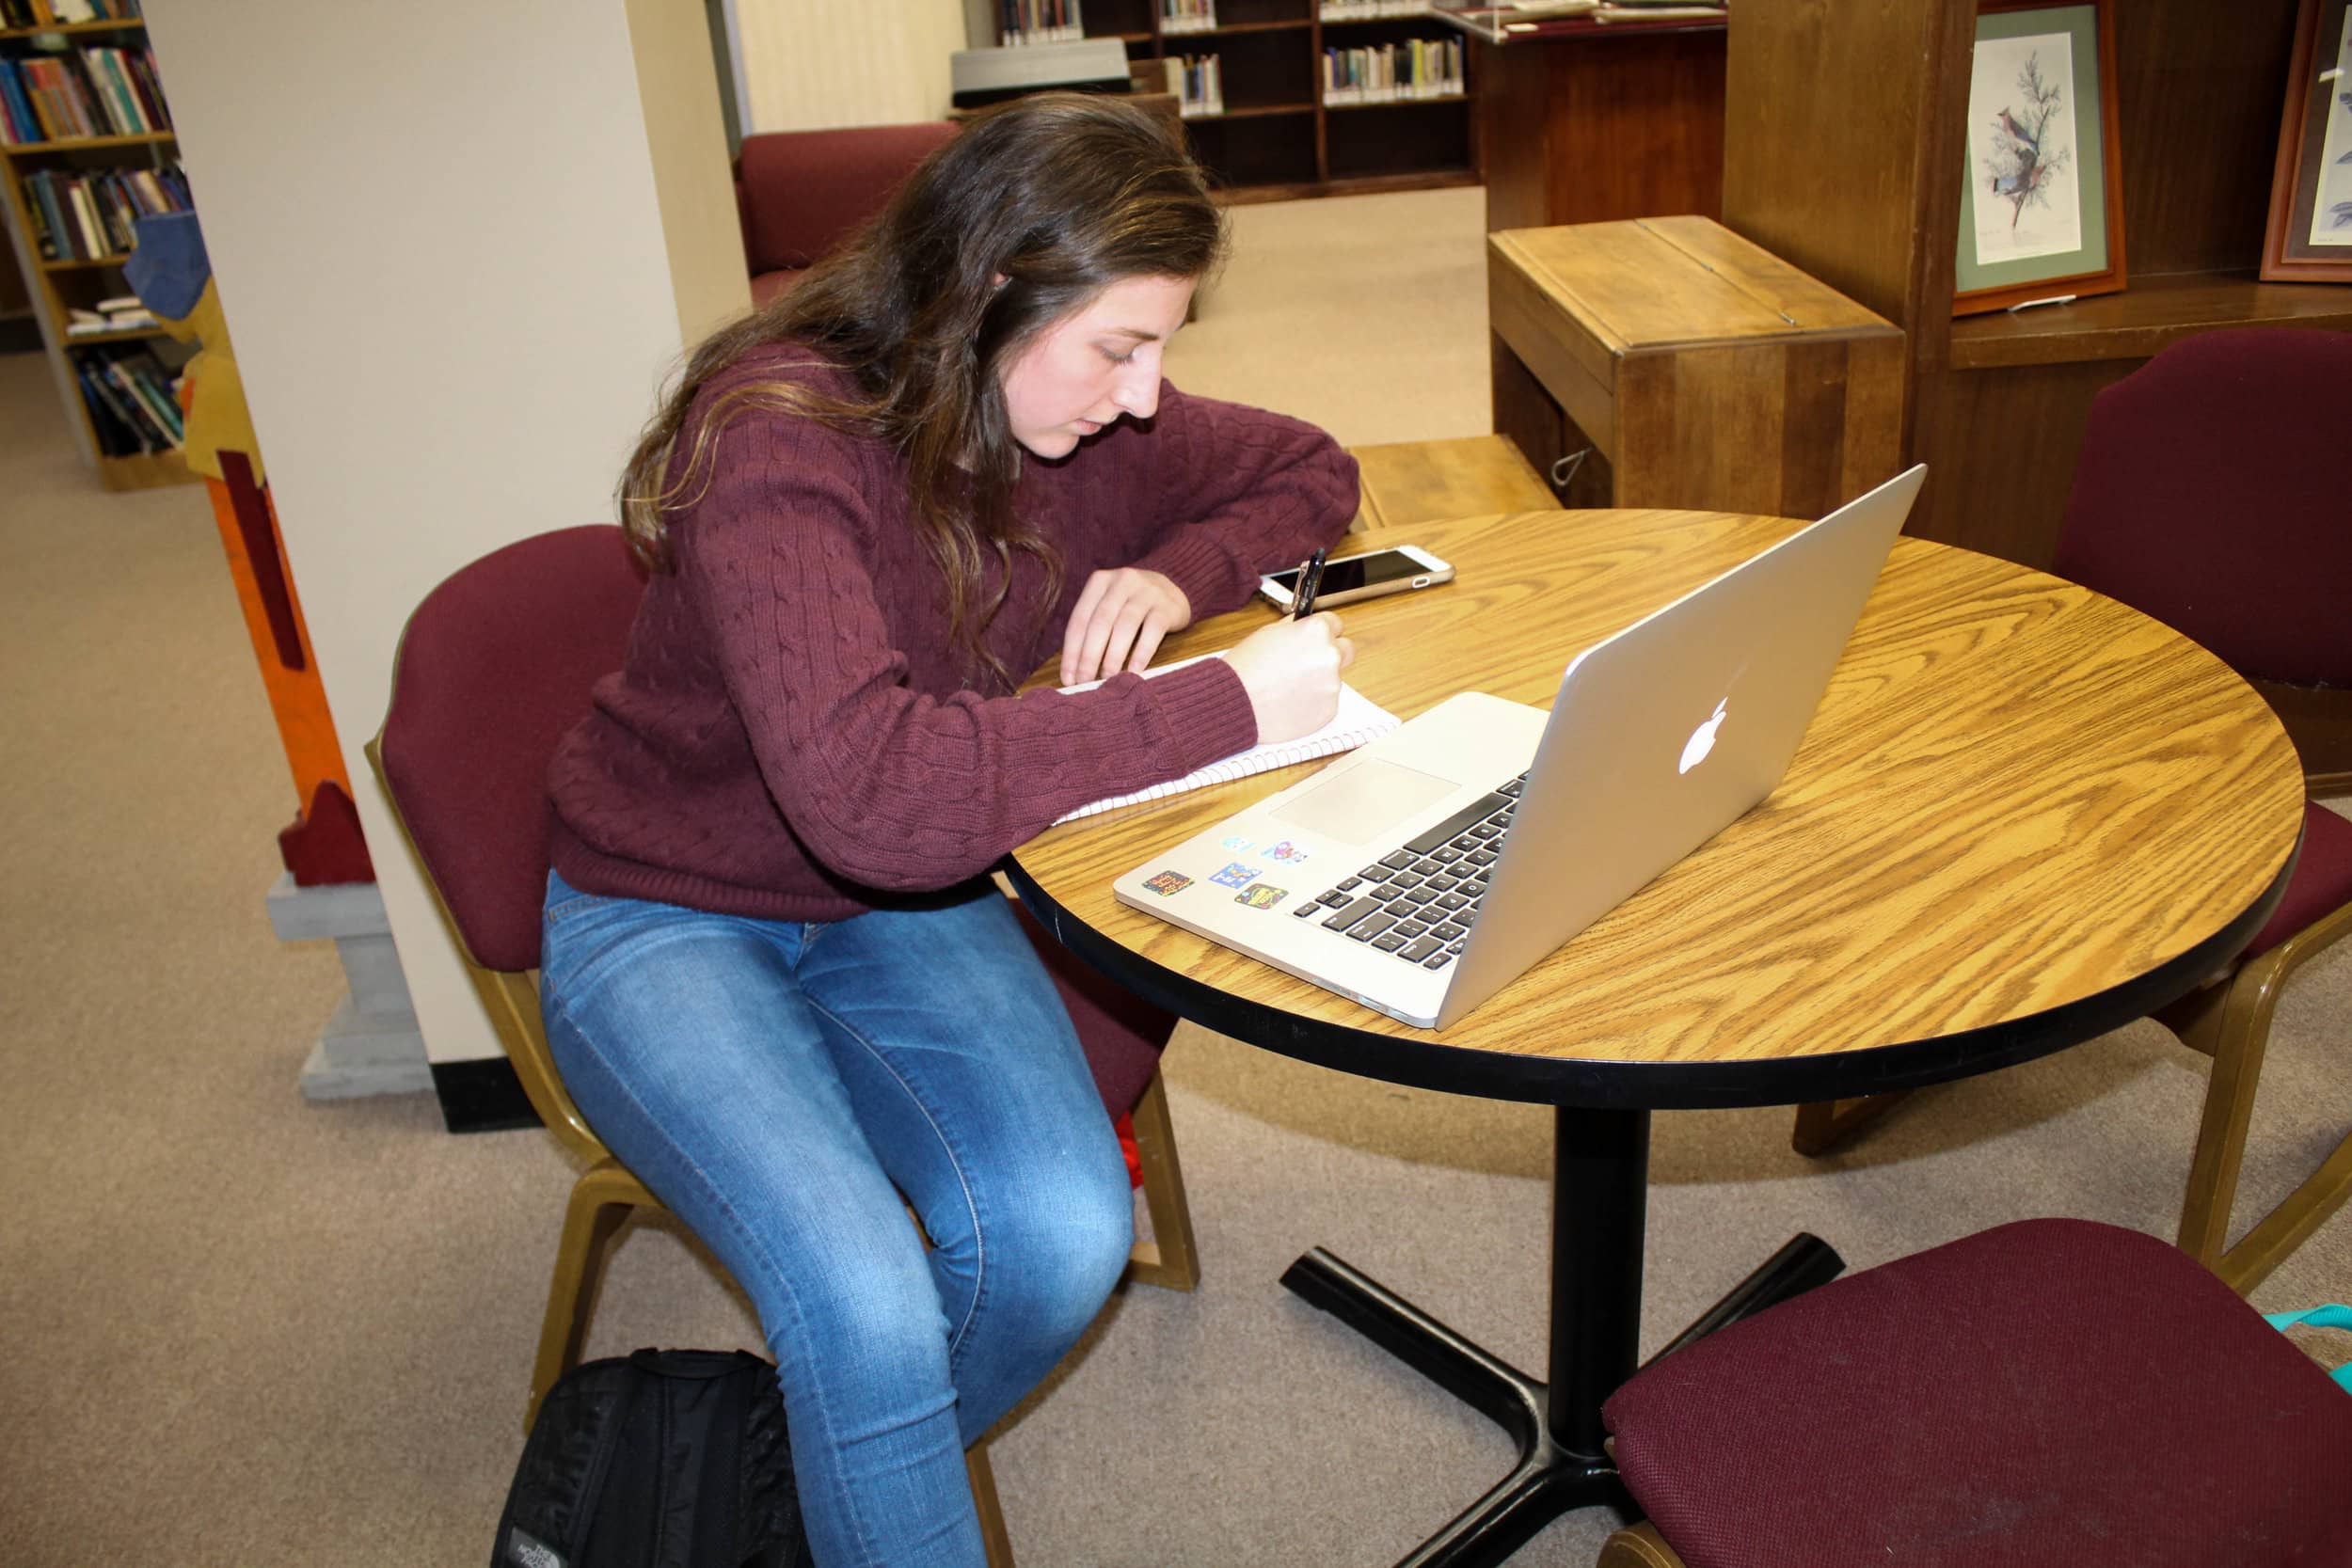 Kyli Schmitt, a junior biology major, uses her laptop as she studies in the library.